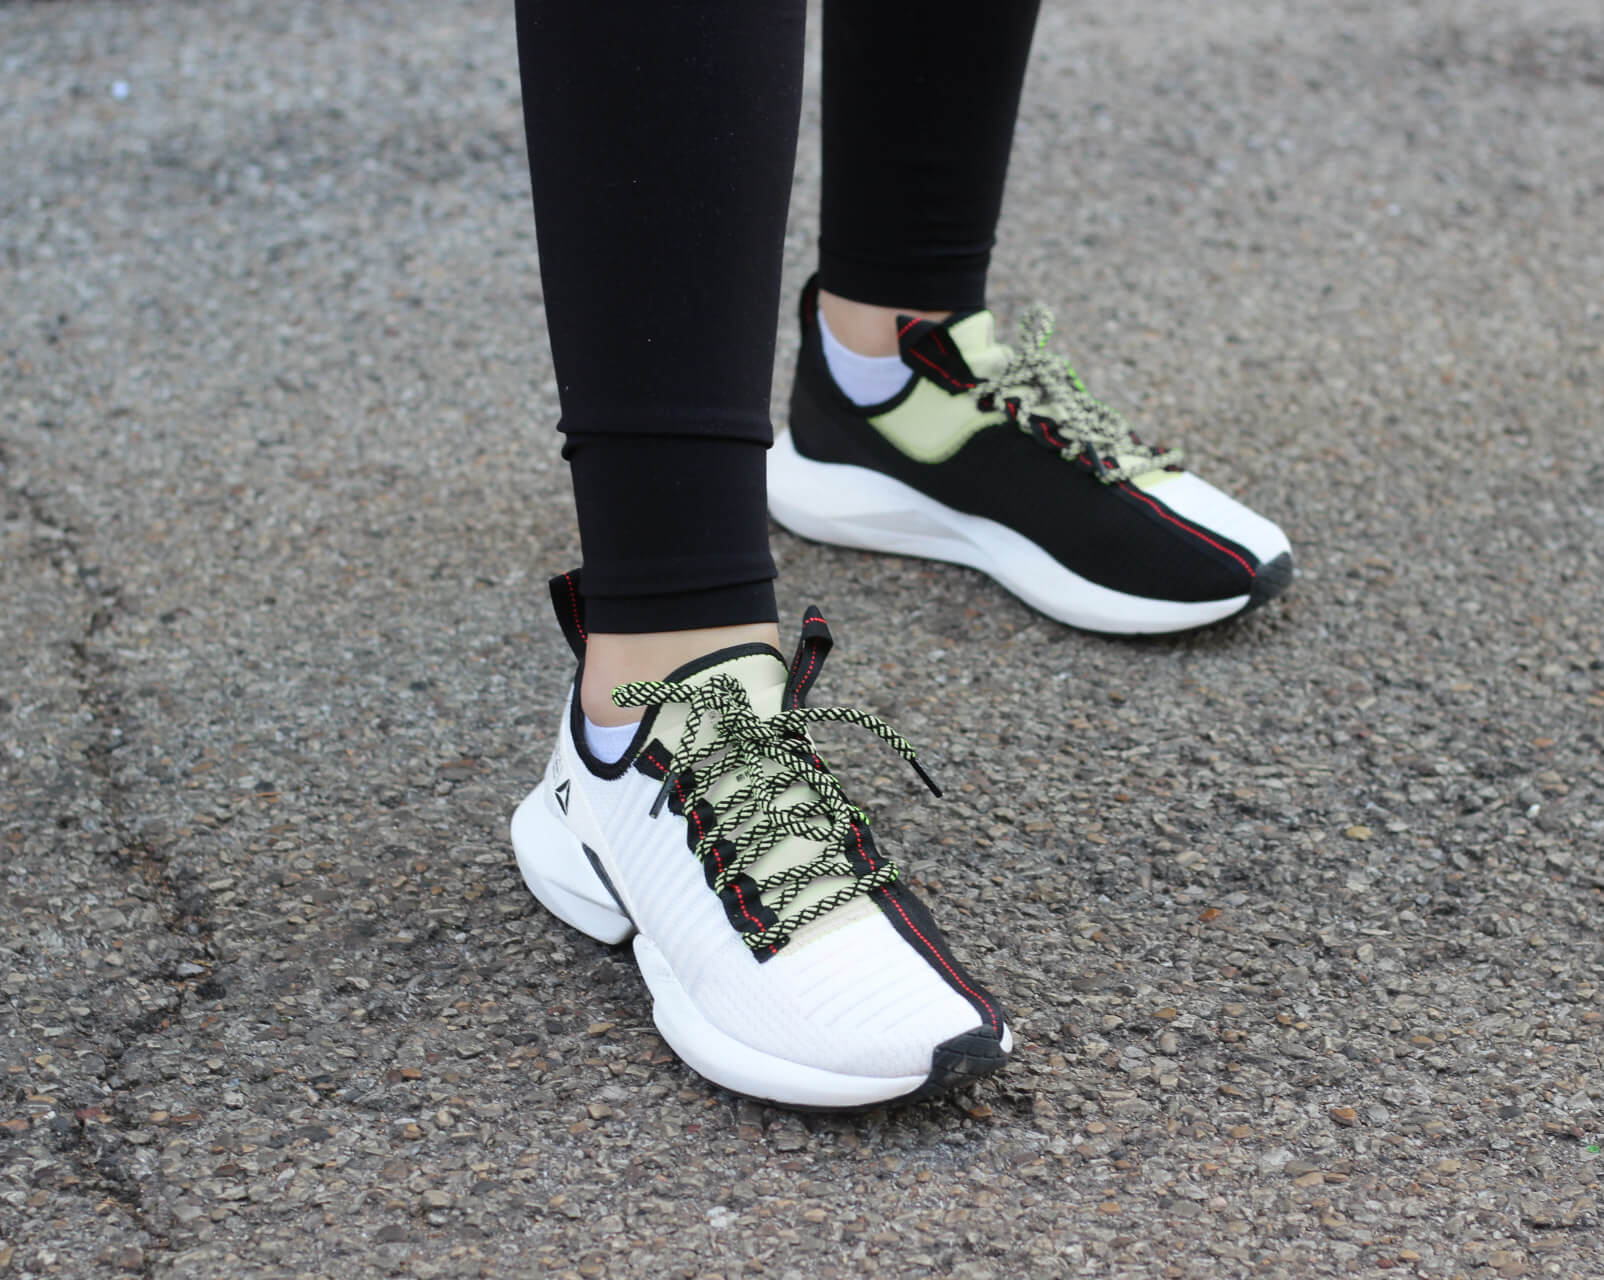 How I #SplitFrom Conformity with Reebok Sole Fury Sneakers